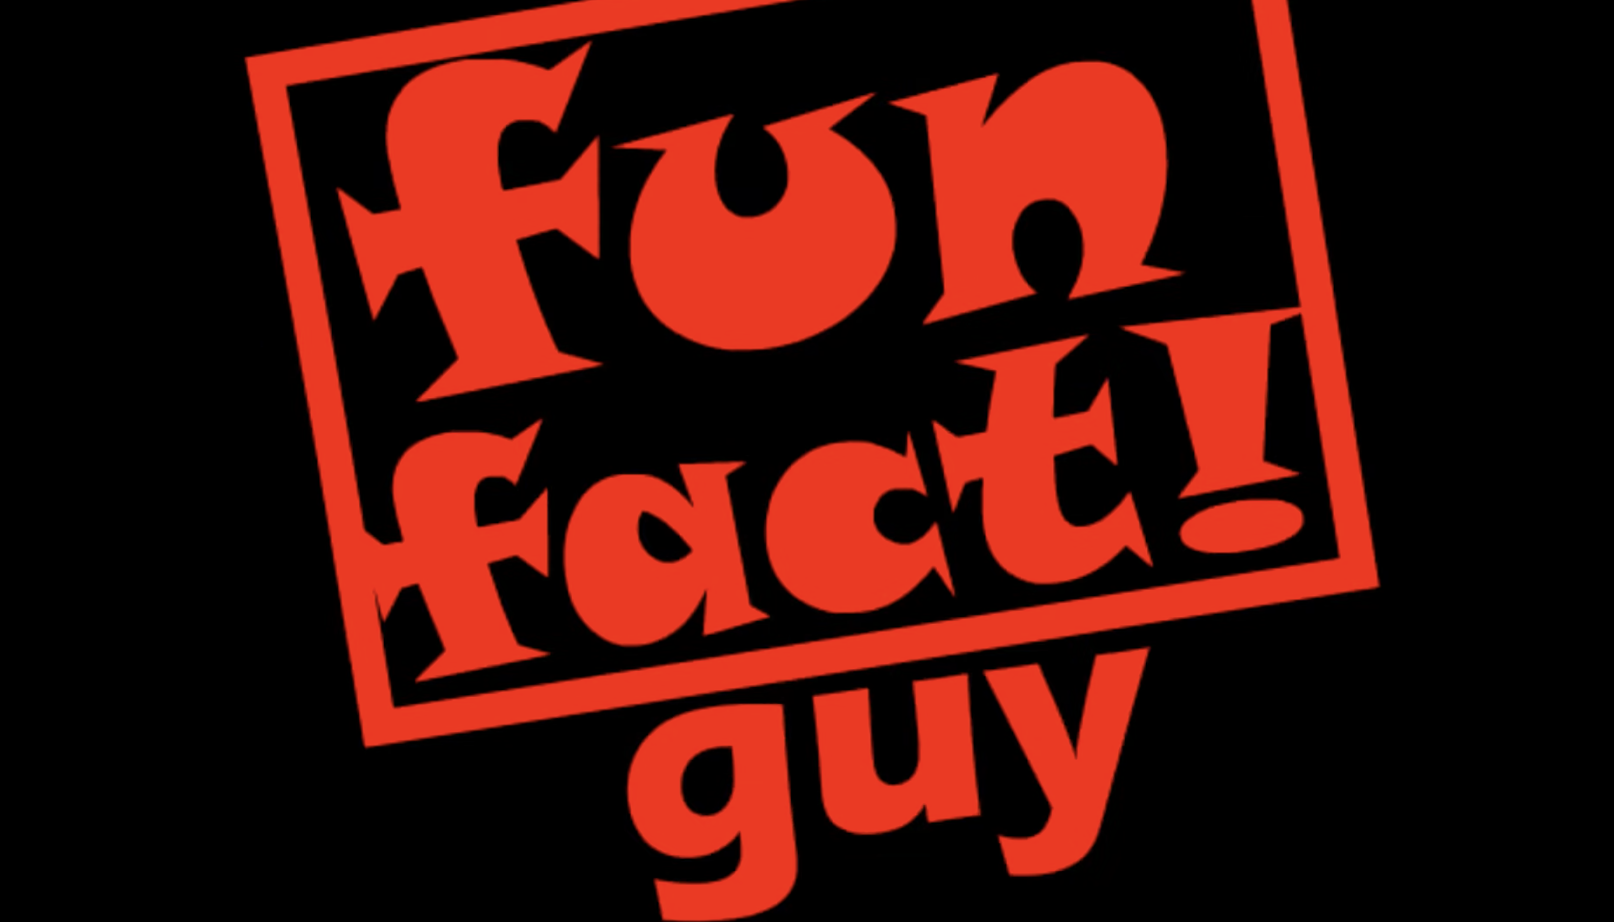 funny guy facts